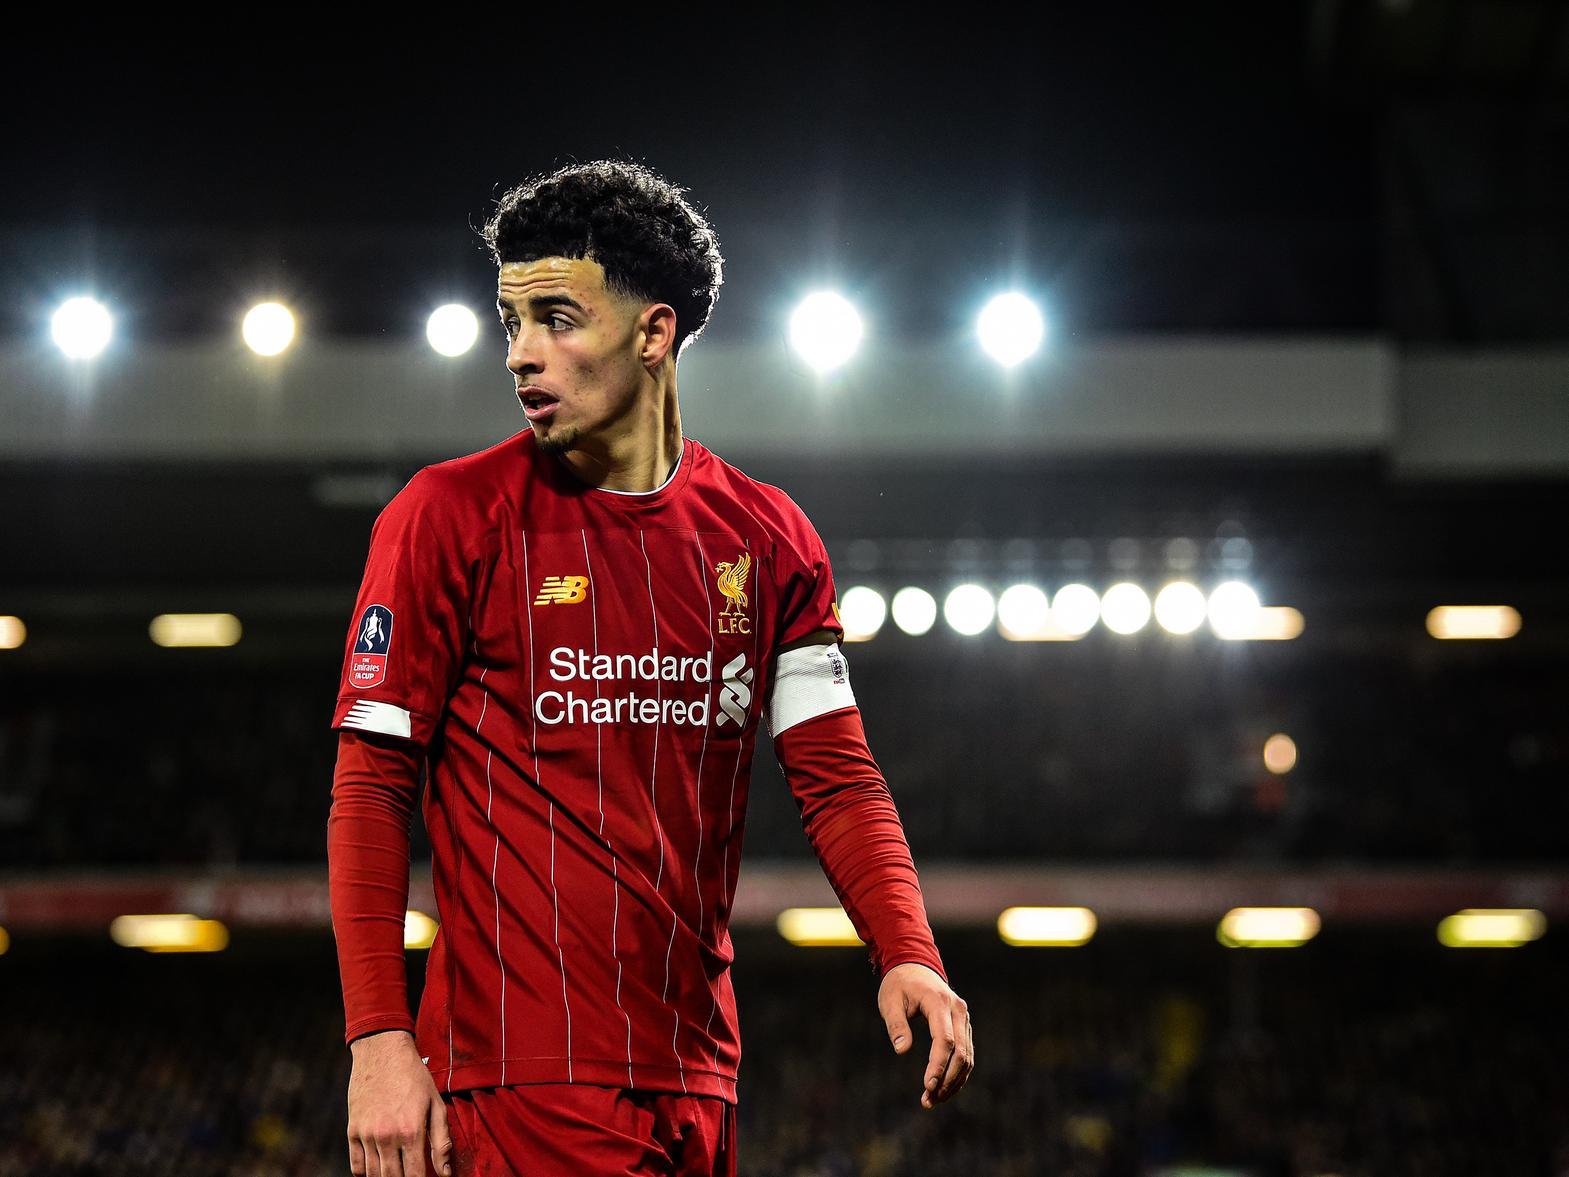 The 19-year-old starlet netted the winner in a Merseyside derby FA Cup clash earlier this season and has made seven first-team appearances this campaign.